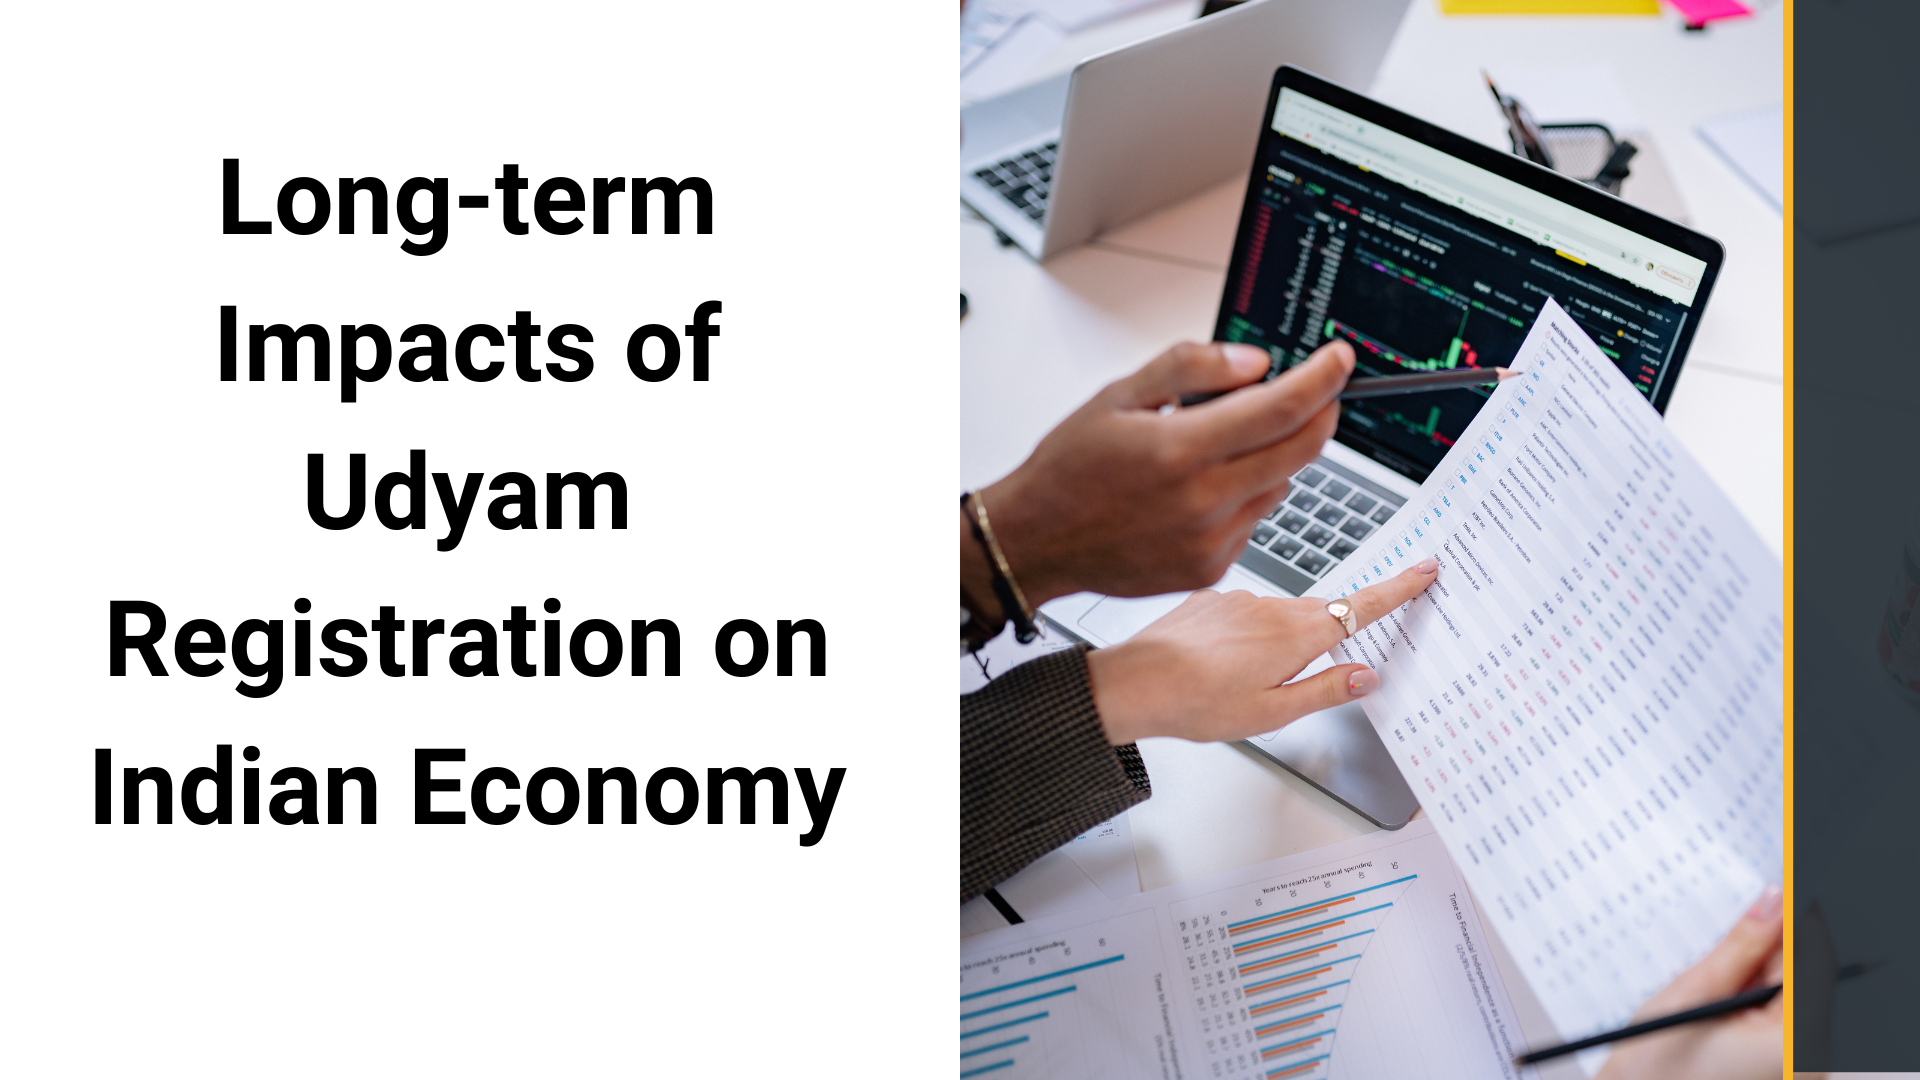 Long-term Impacts of Udyam Registration on Indian Economy